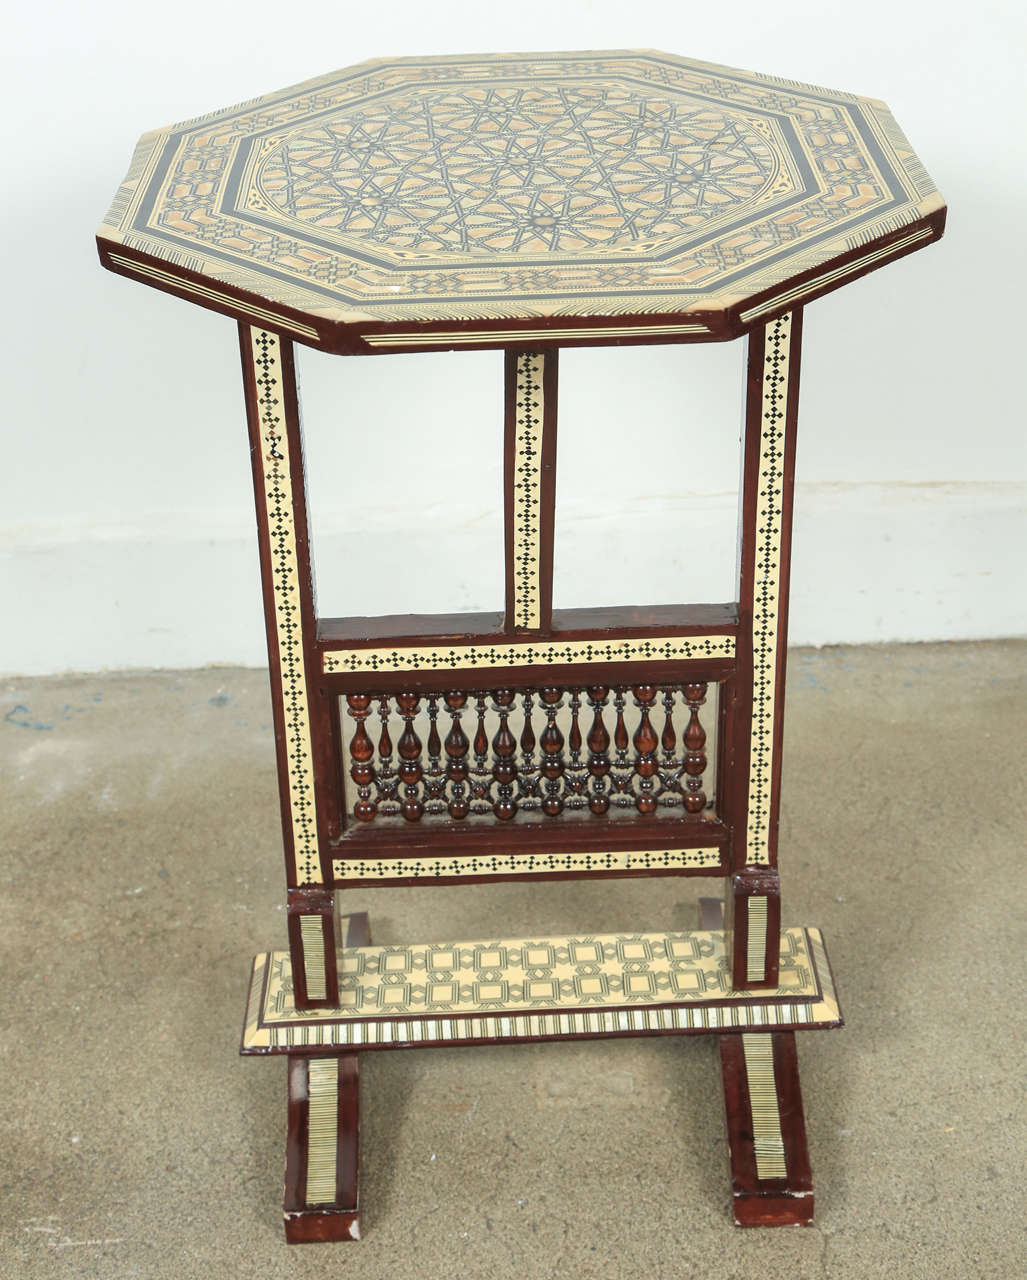 Egyptian octagonal side table, marquetry inlaid with detail fret work in the bottom.
Tilt top table.